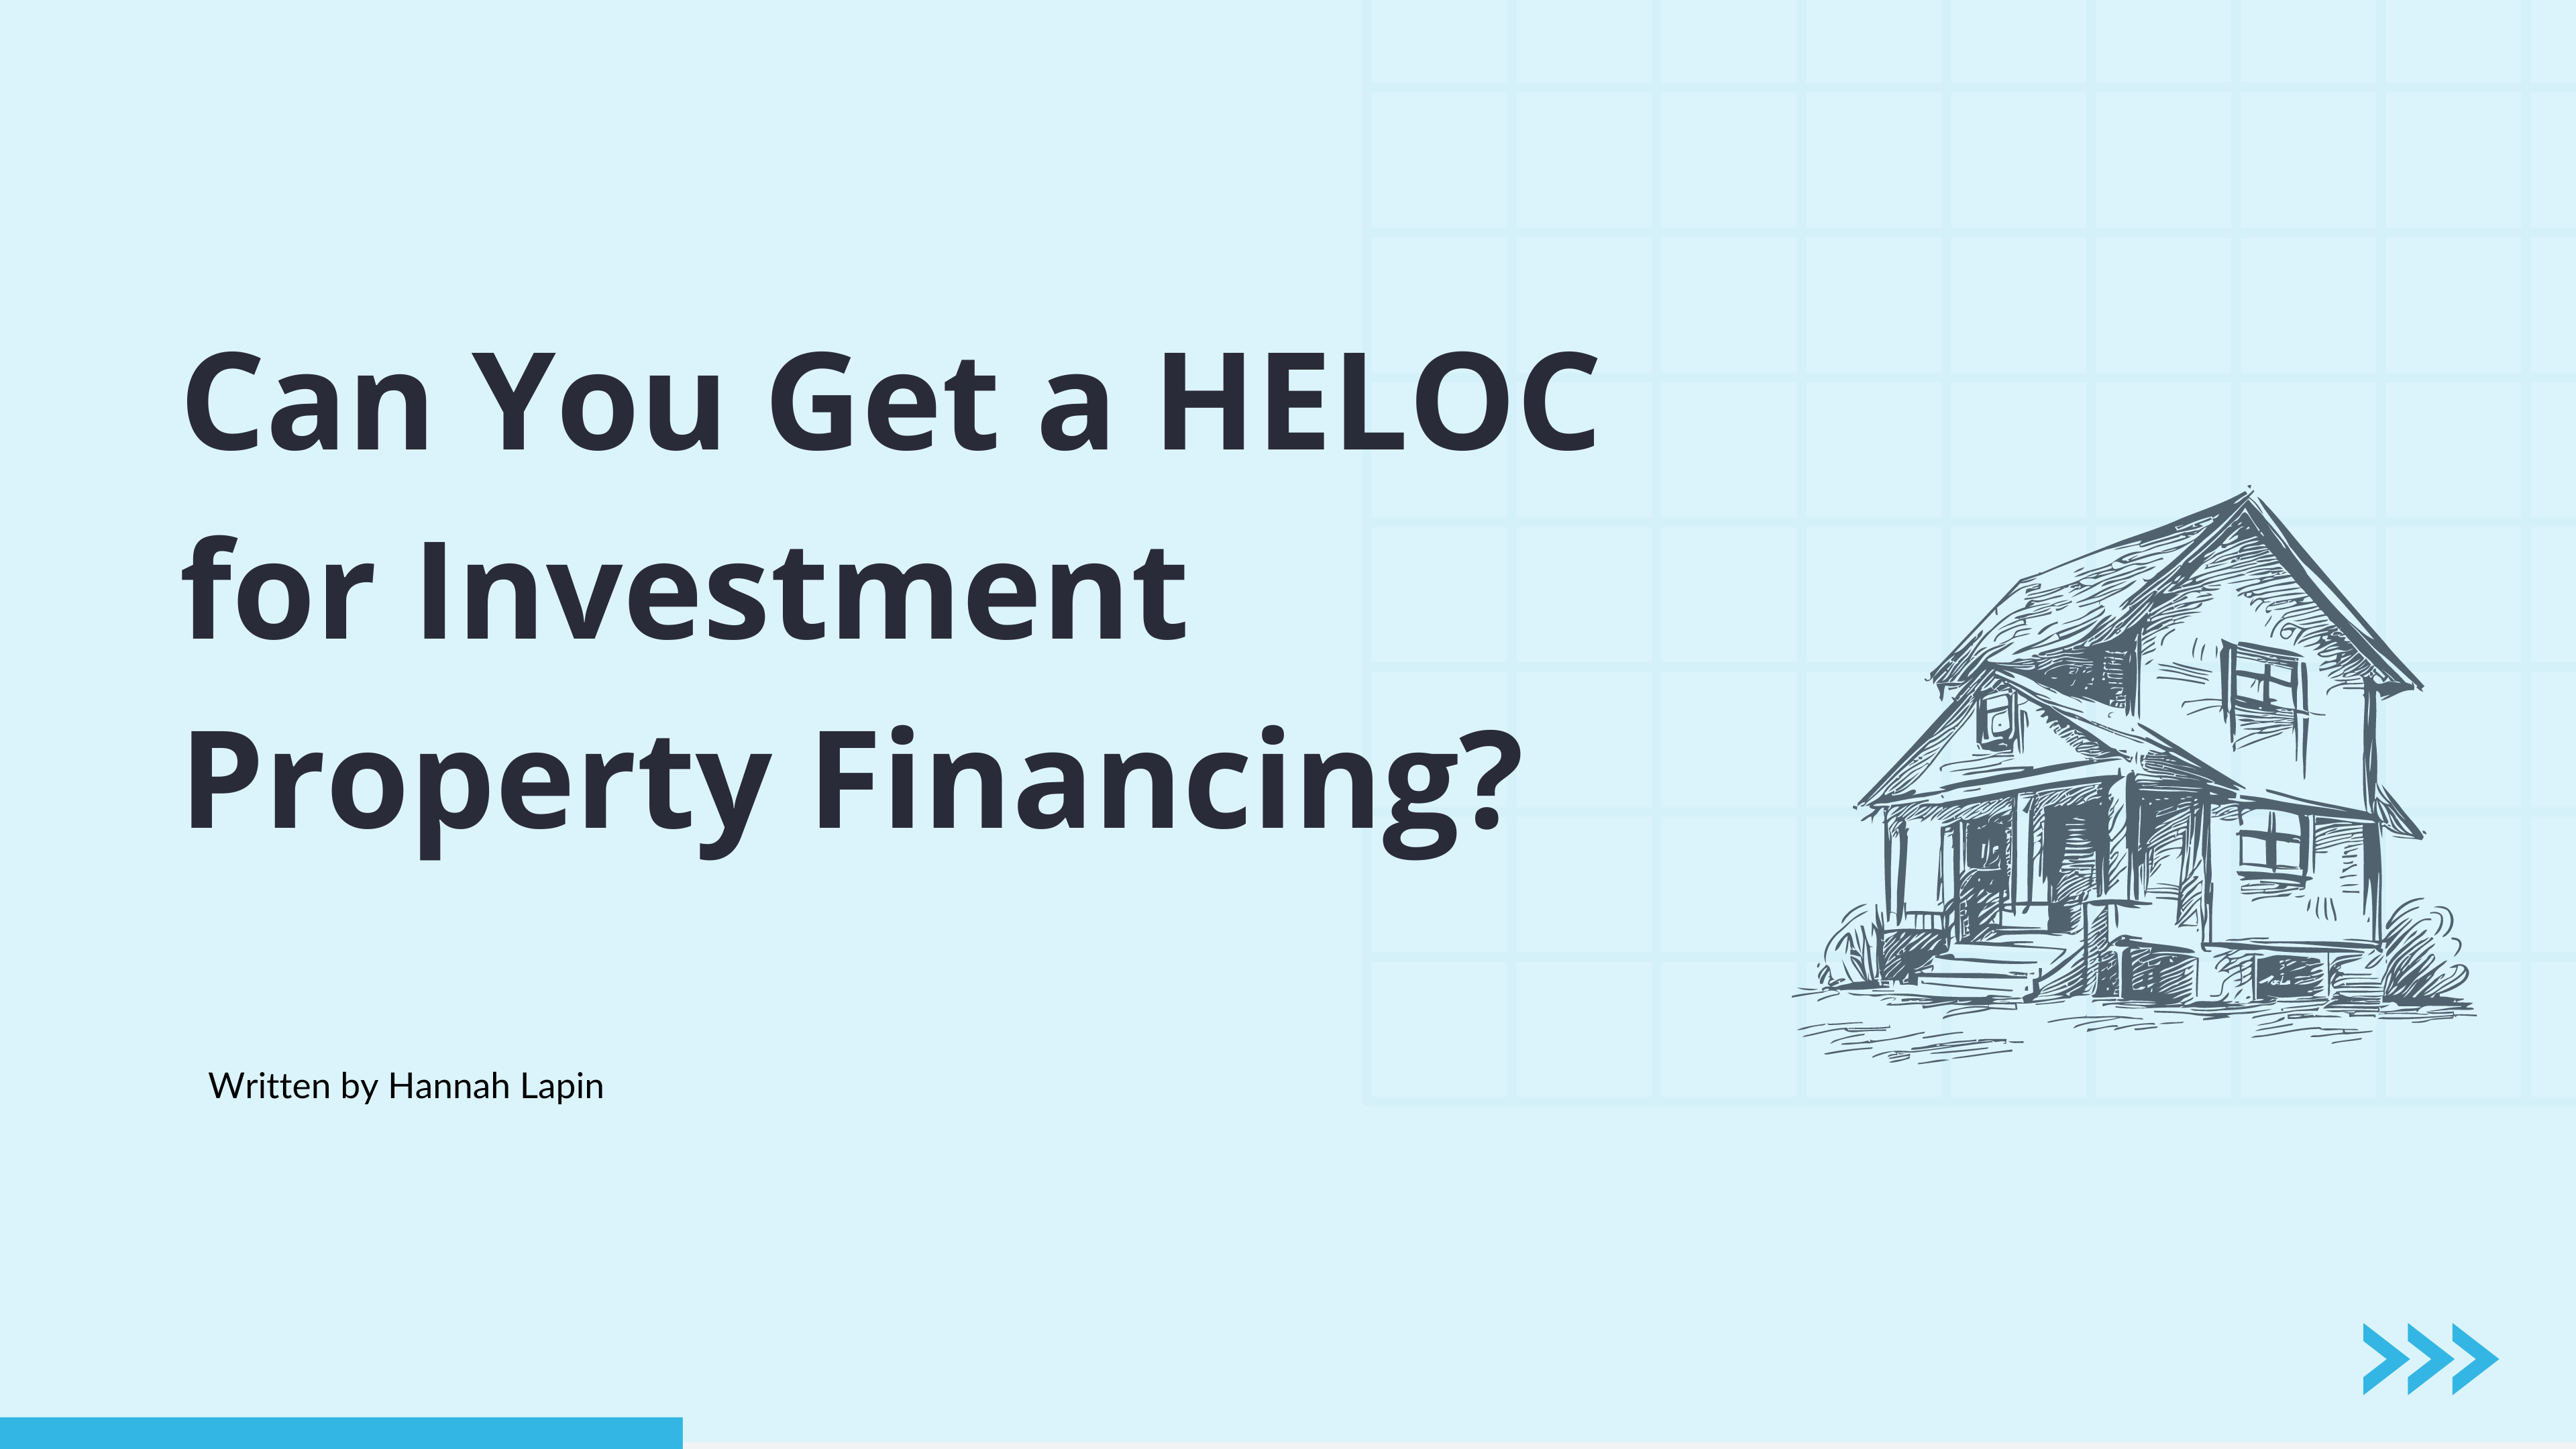 HELOC for investment property